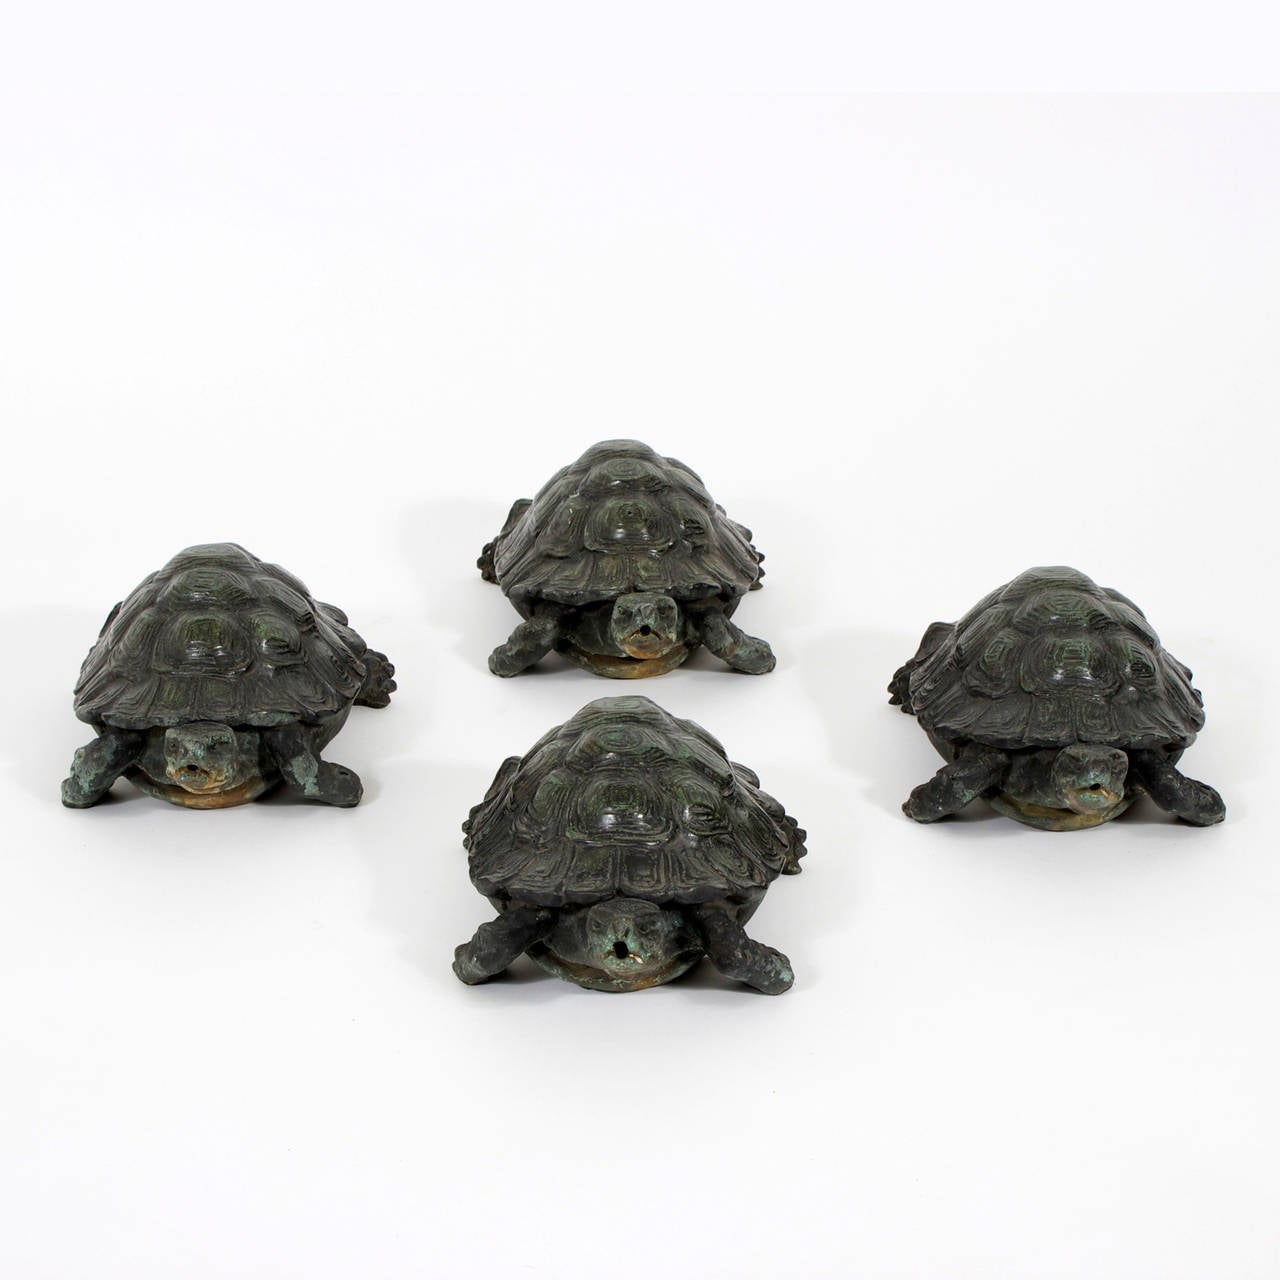 4 vintage bronze turtles or tortoises, cast in life like form and detail, with charming verdigris patina. Once fastened to a fountain, these tortoises have aged to perfection. They can be used outdoors or enjoyed as objects of art.
Priced